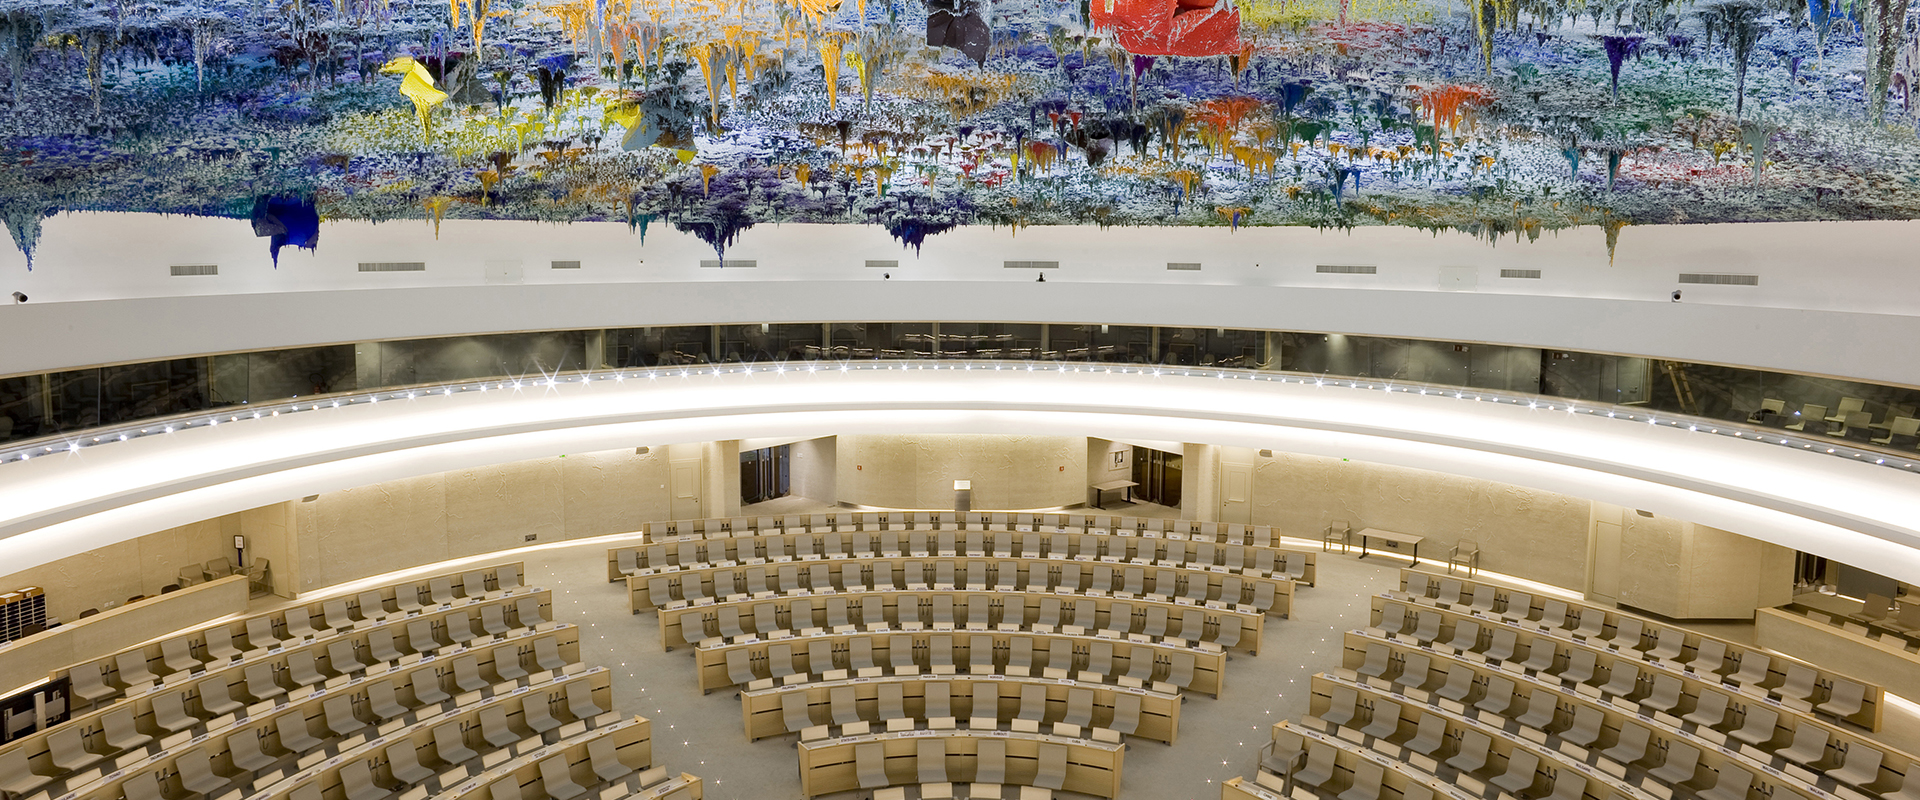 The United Nations Office – The Human Rights and Alliance of Civilizations Room